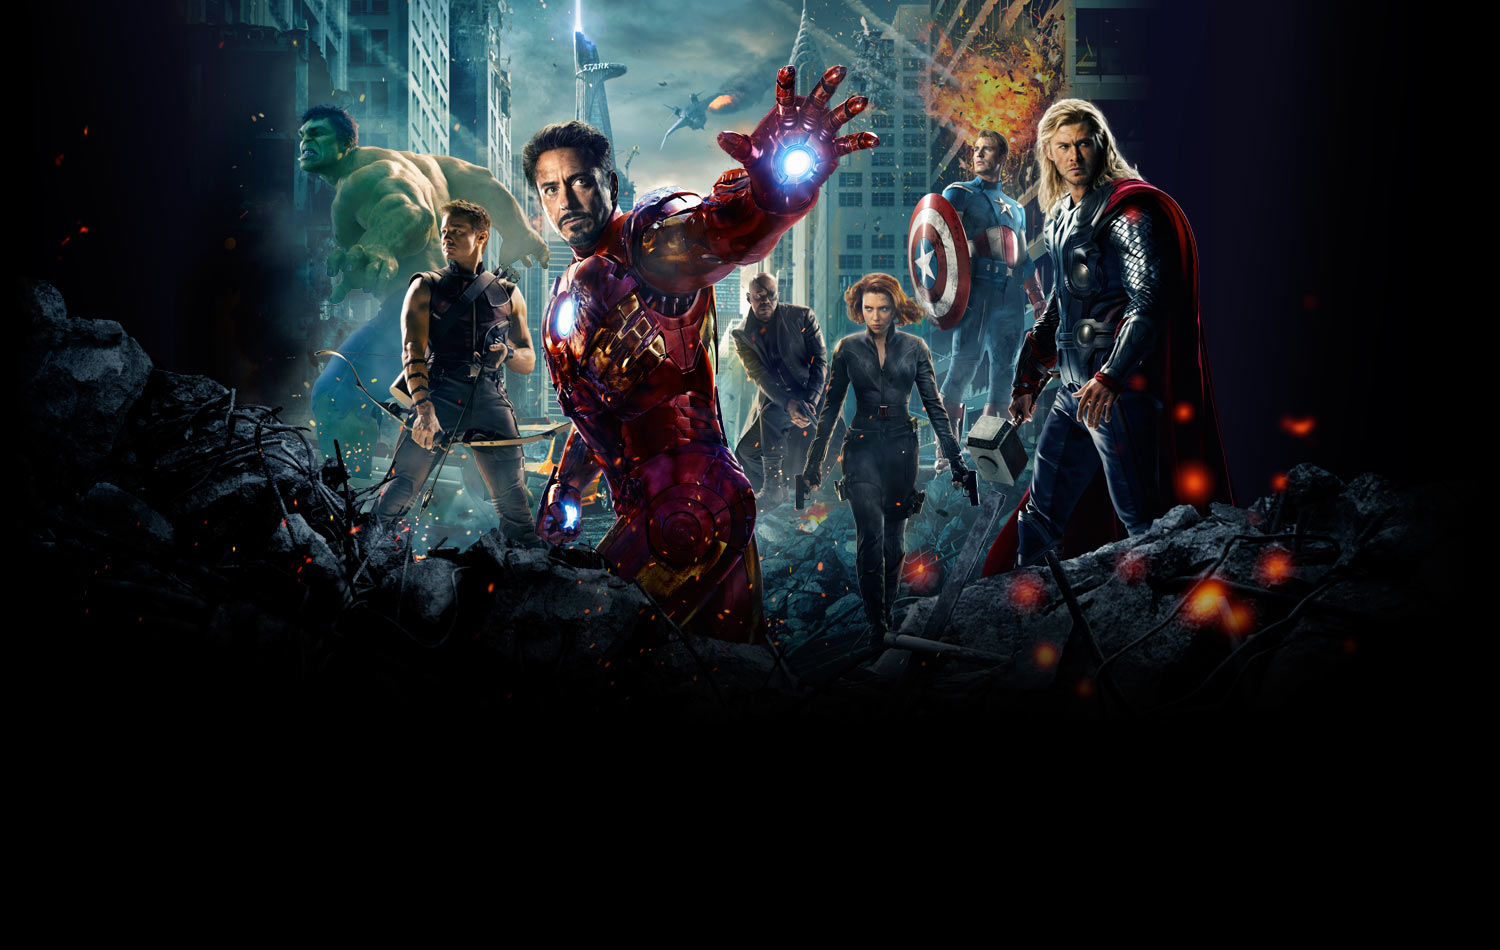 By League Of Fiction The Avengers Wallpaper Trailer HD Release